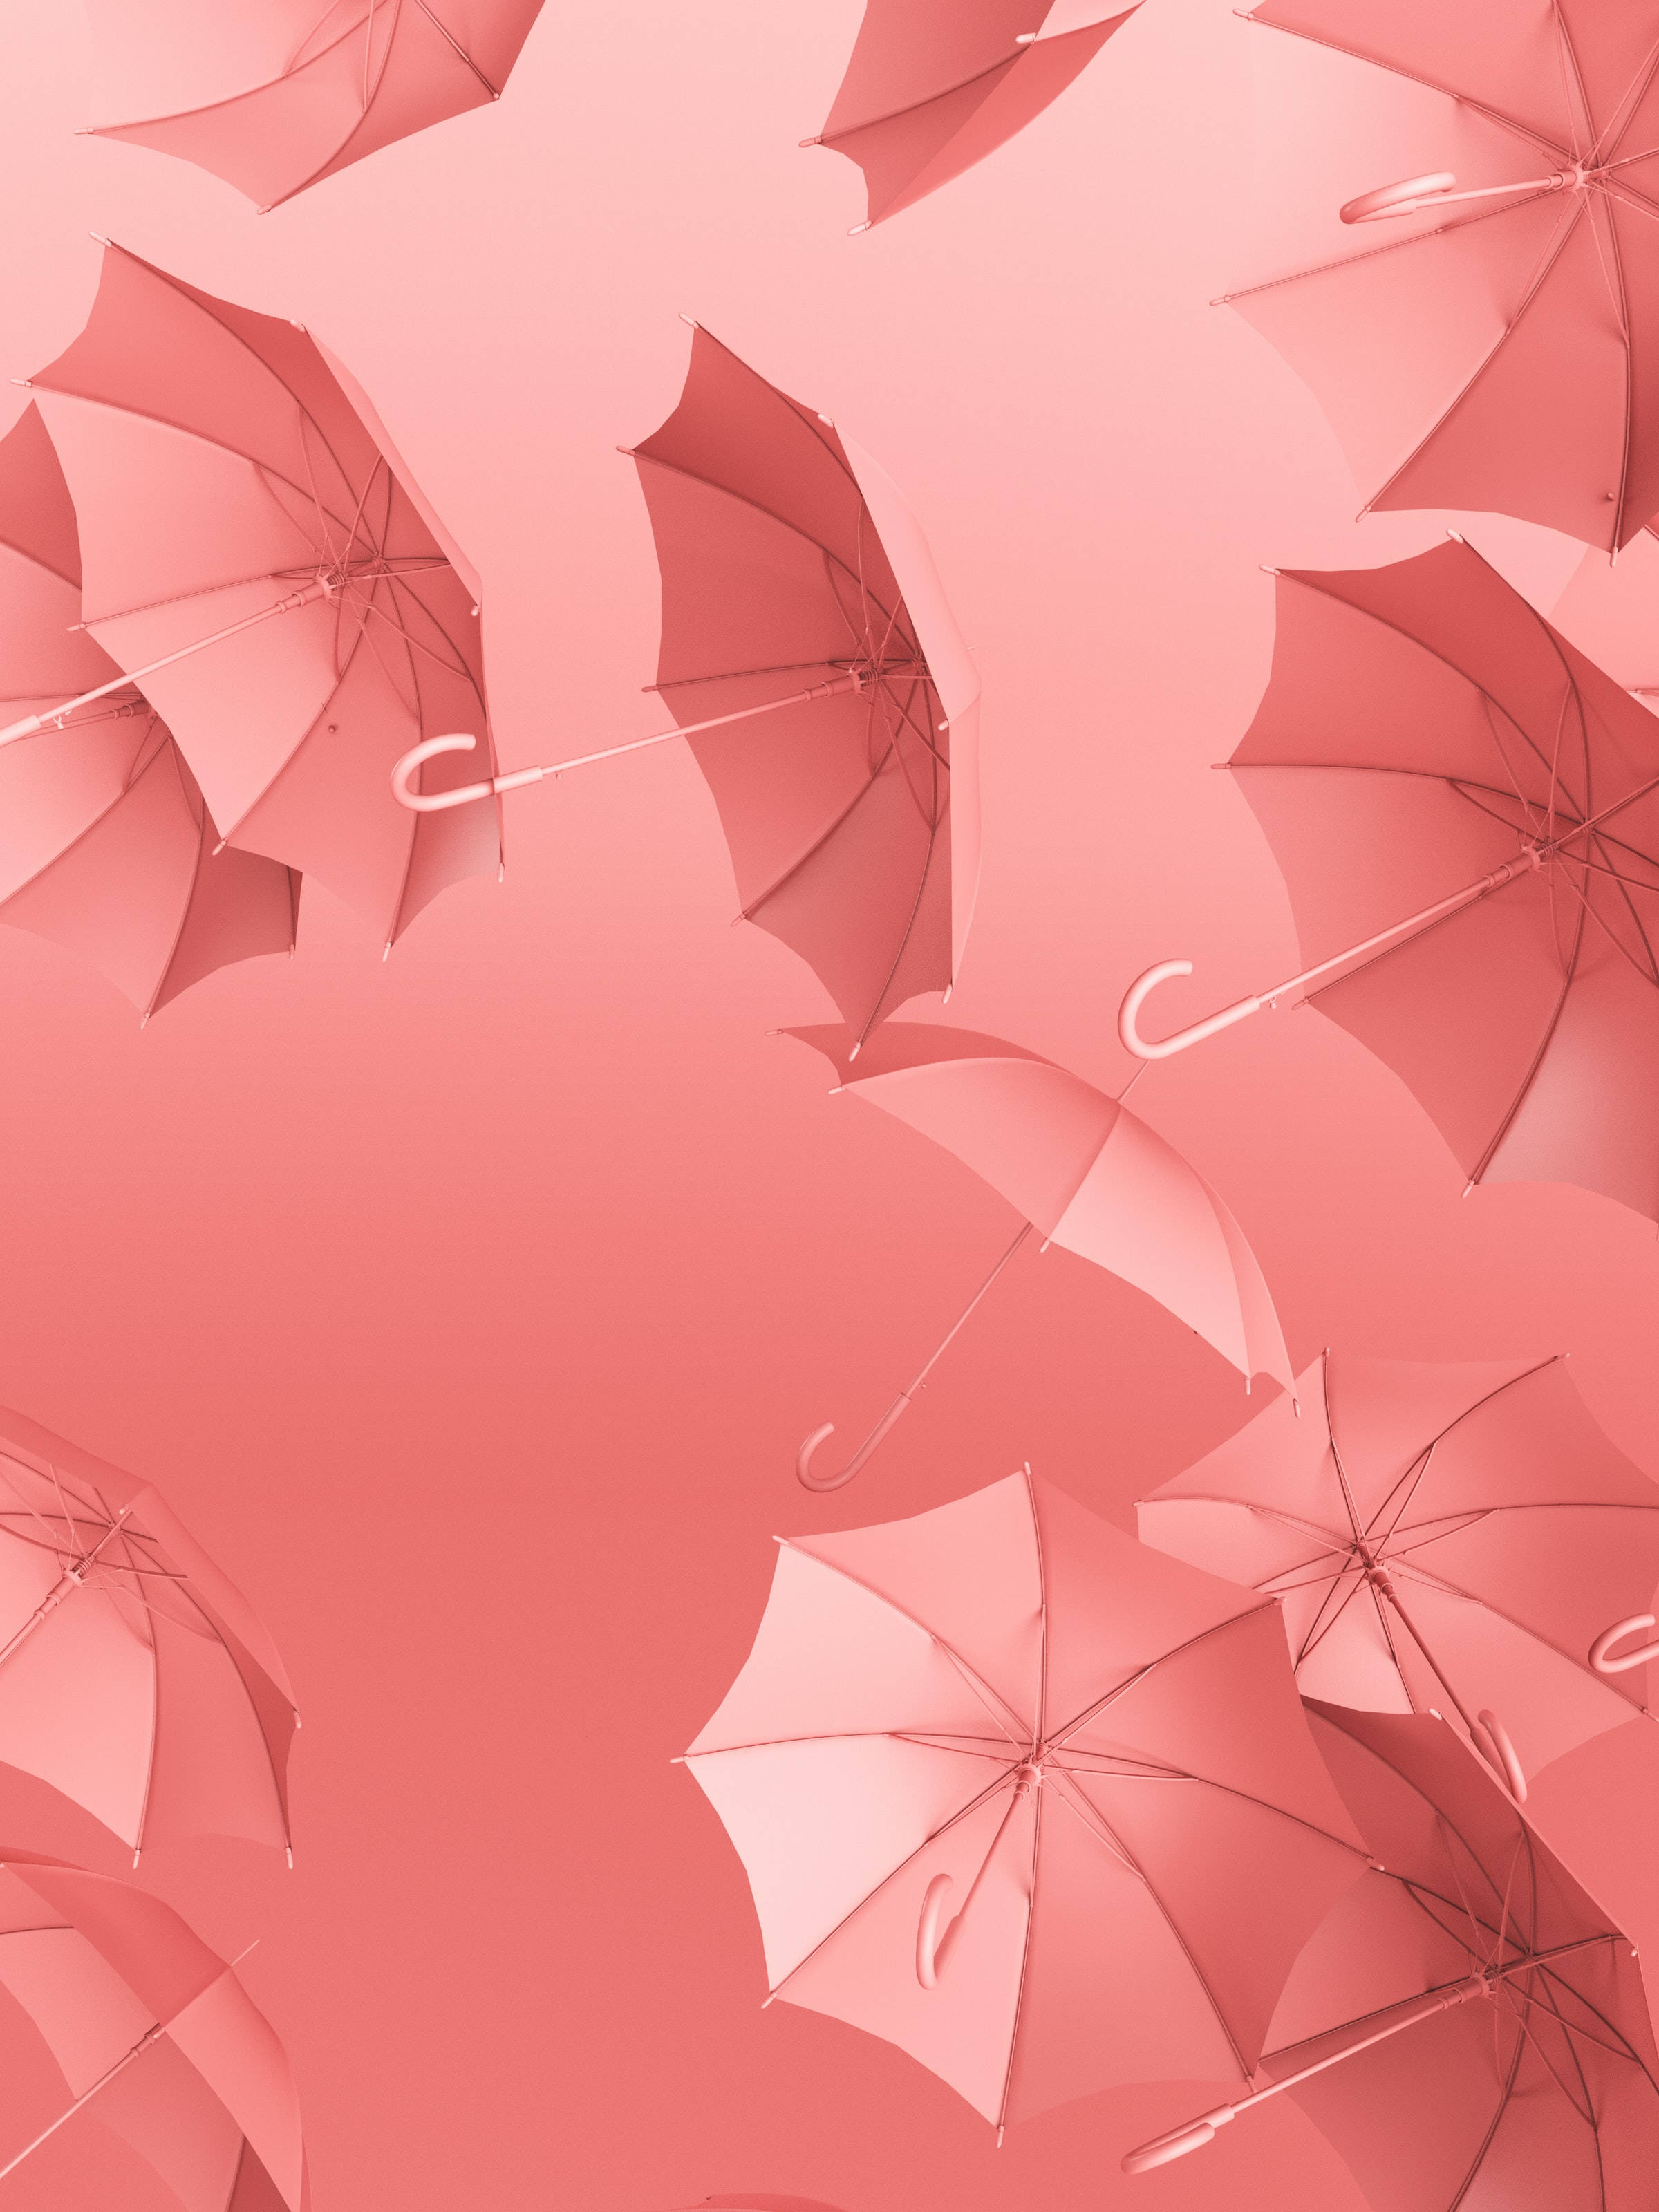 Cute Pink Aesthetic Floating Umbrellas Background